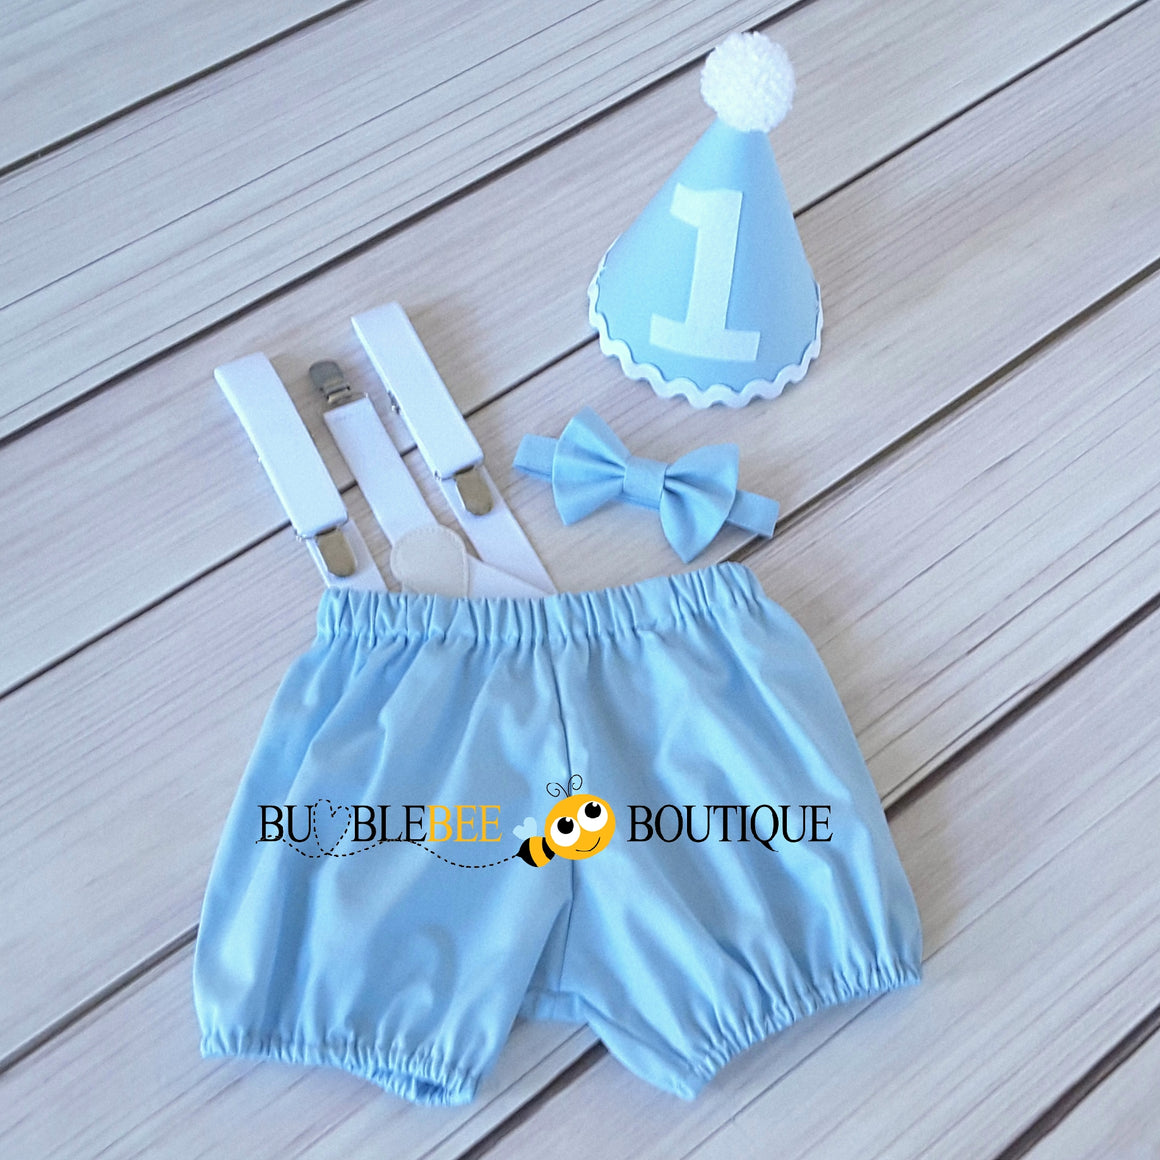 Baby Blue & White Cake Smash Outfit